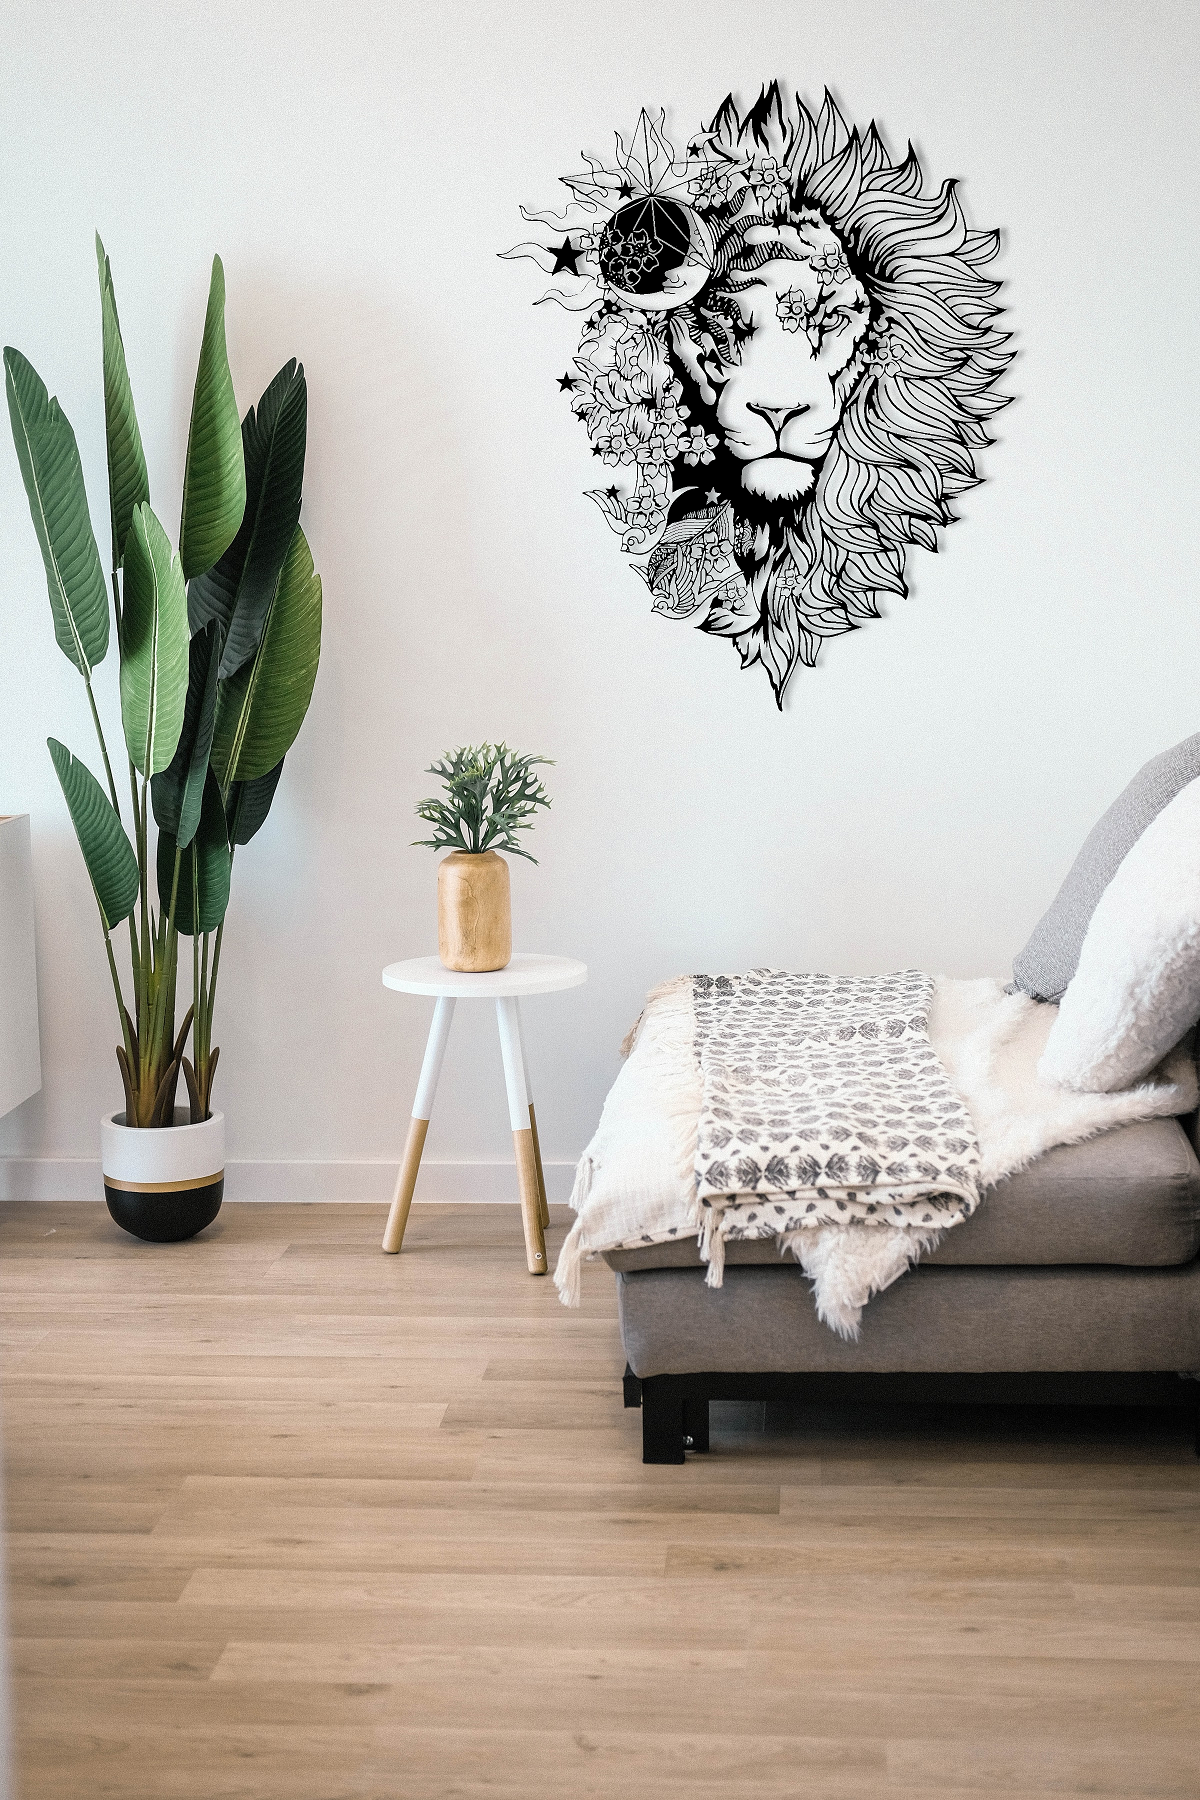 ・"Astro Lion"・Premium Metal Wall Art - Limited Edition